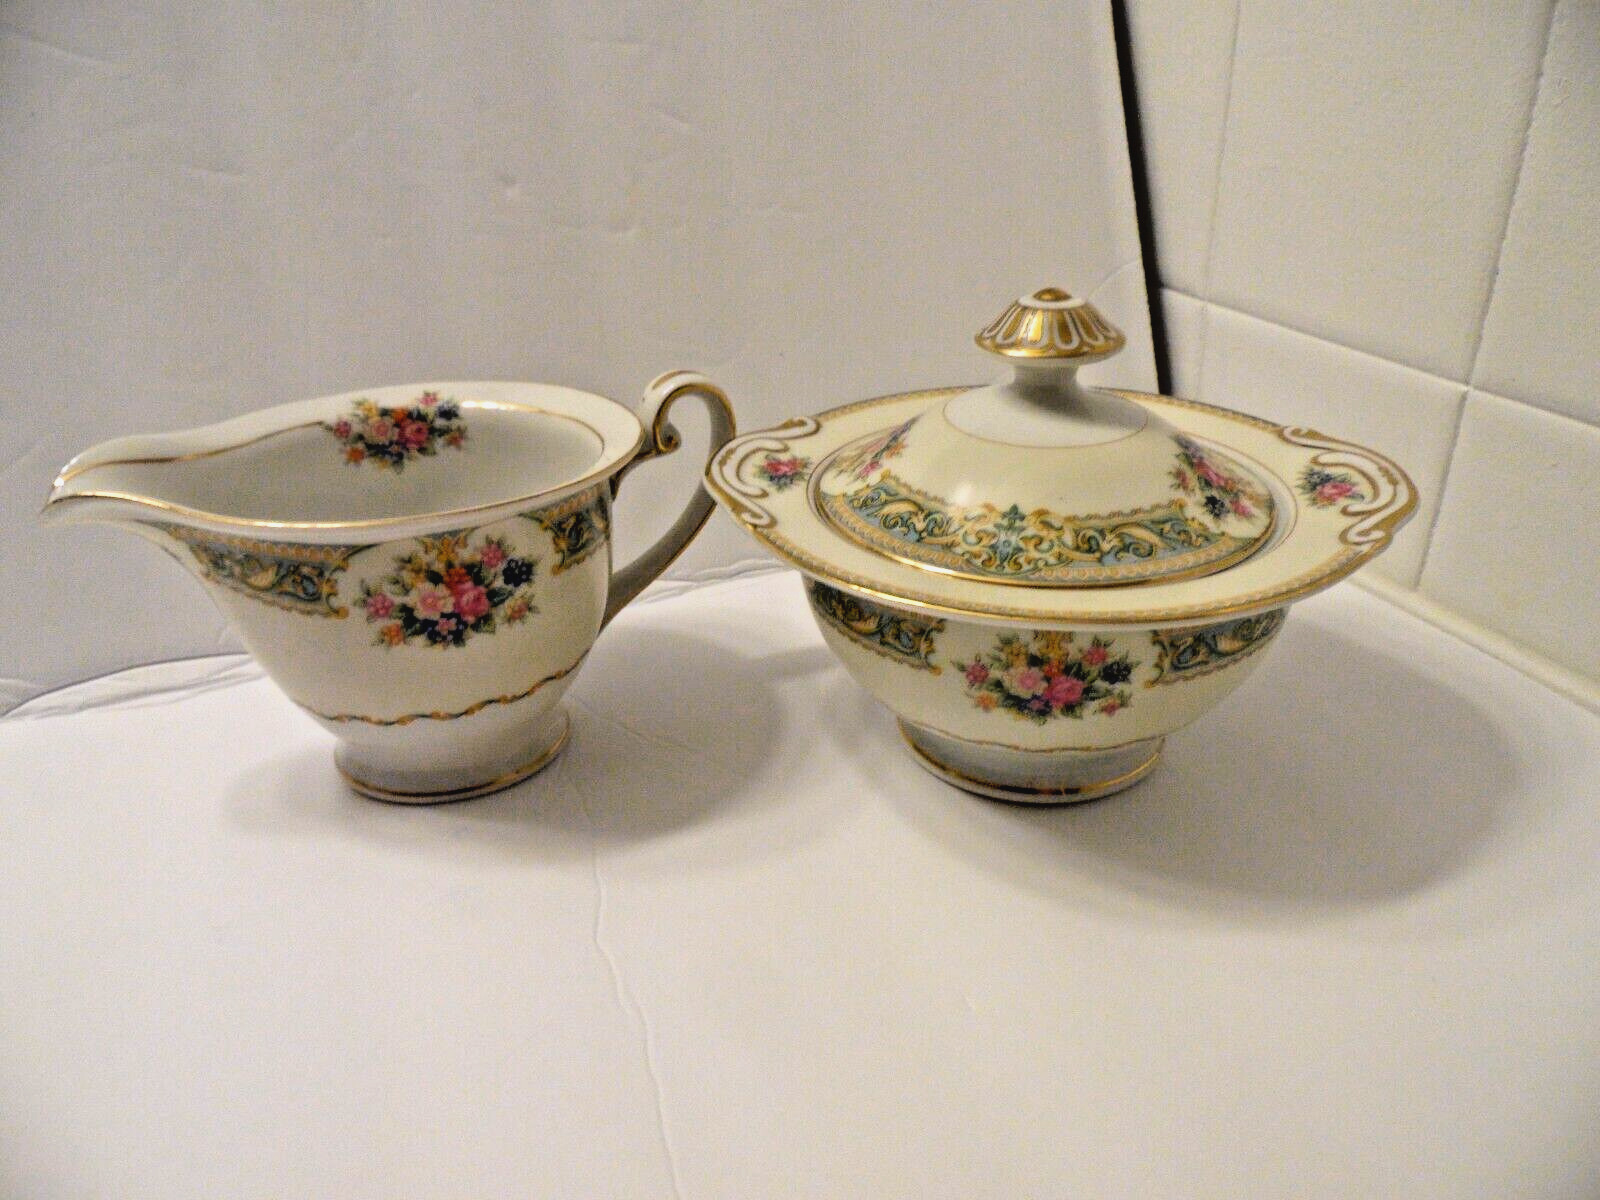 Spoto China Creamer & Covered Sugar Bowl. Made in Occupied Japan.